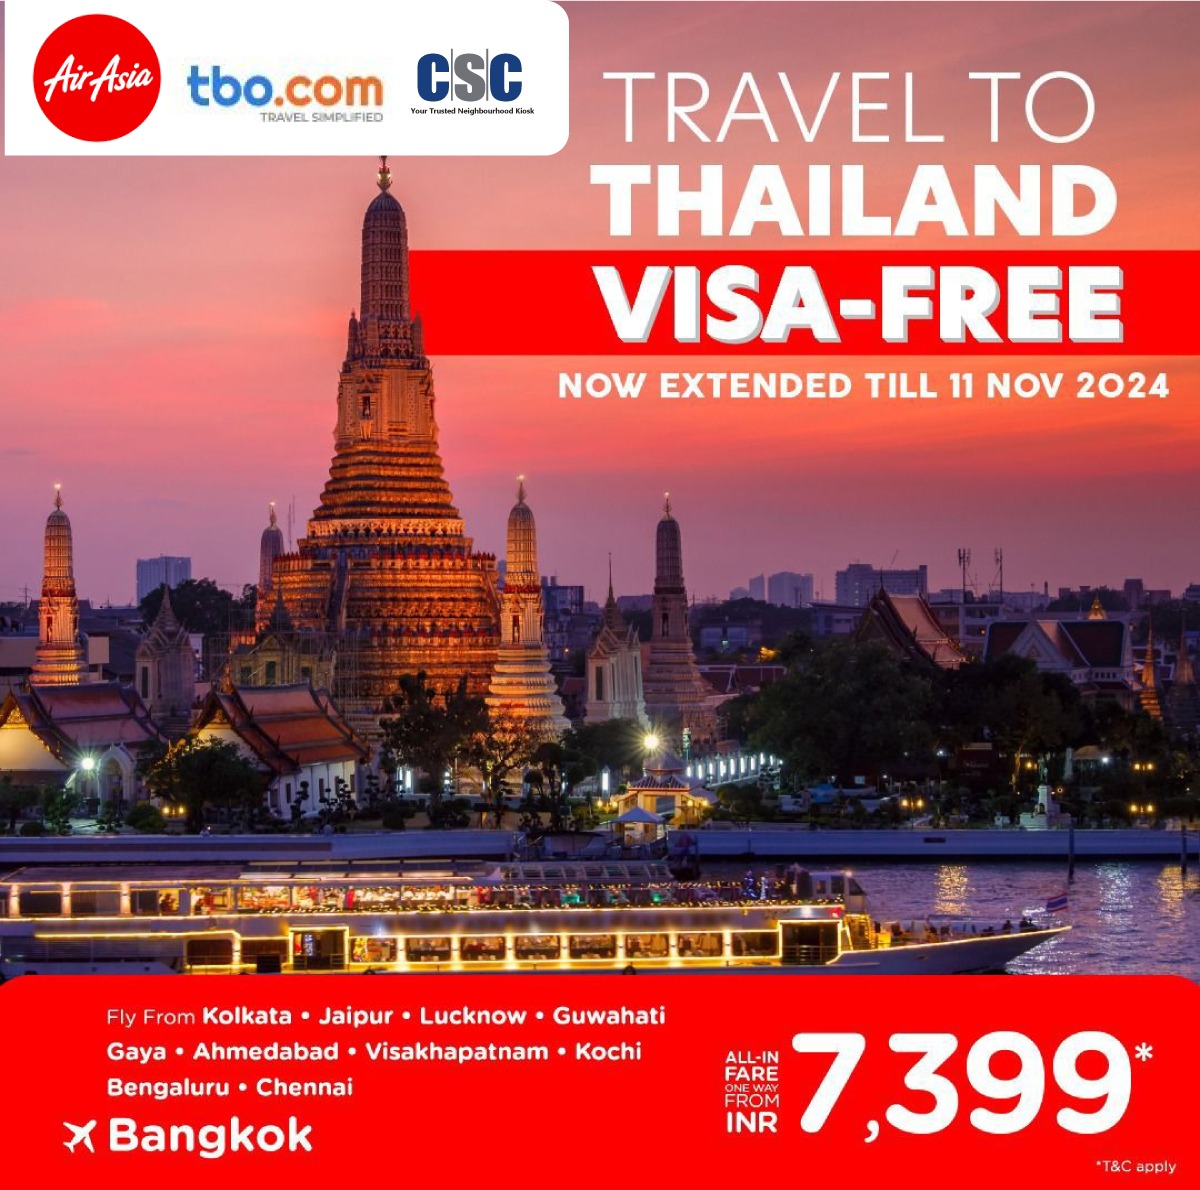 Special Offers on TBO
Visa-Free Travel to Thailand
Now Extended till 11th.Nov.2024

#csc #digitalindia #TBO #cscsafar #CSCTravelServices #Travelthailand